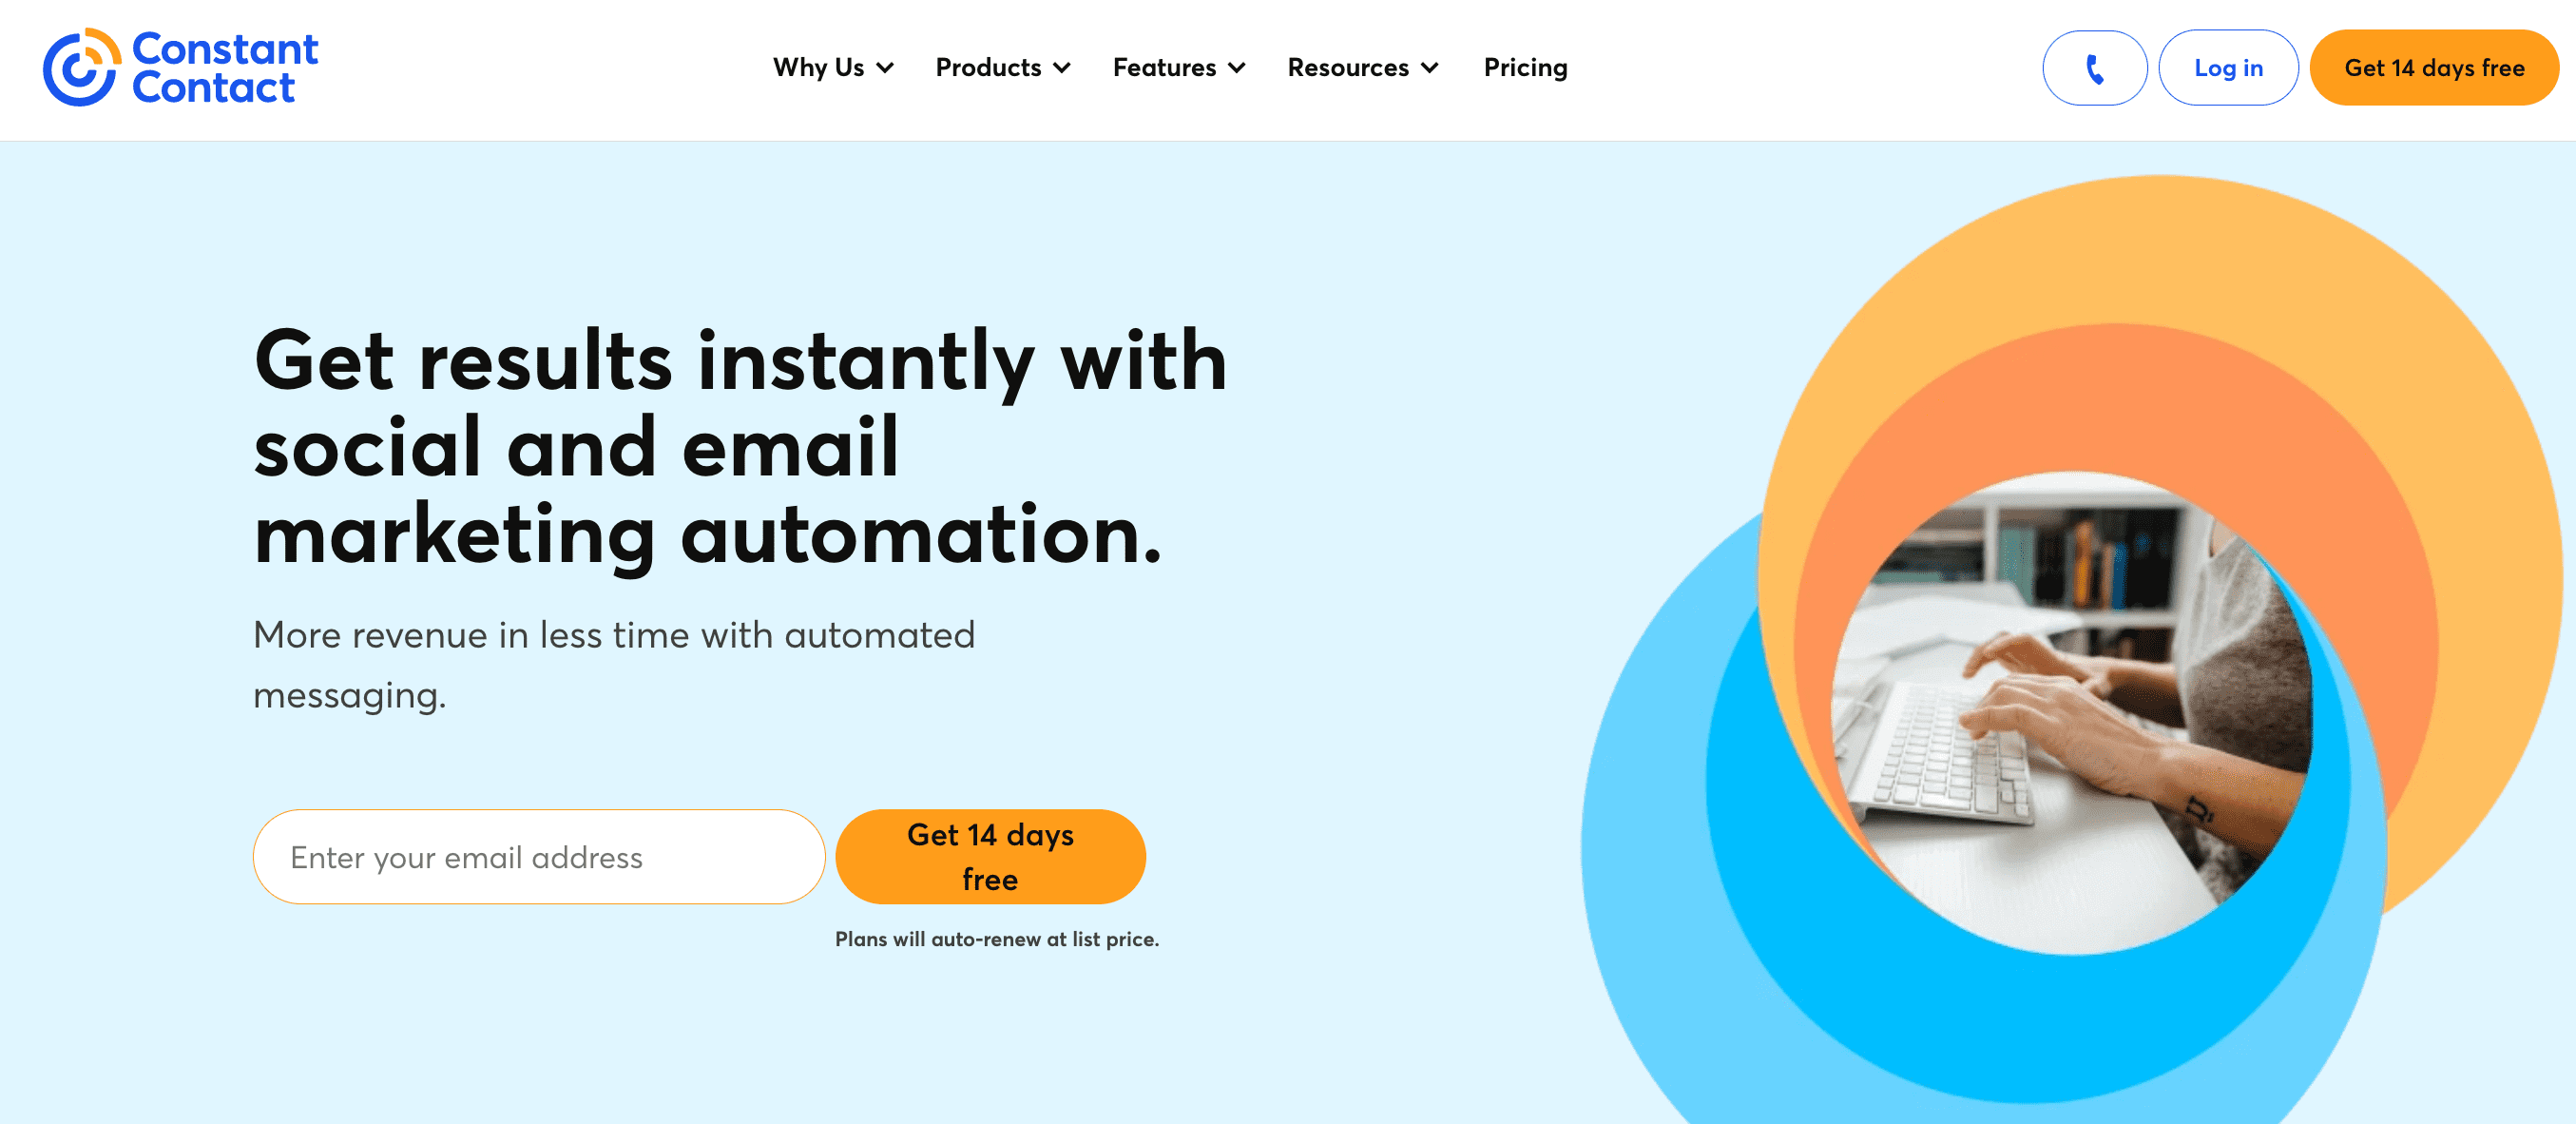 Constant Contact’s landing page with the banner text that reads “Get results instantly with social and email marketing automation.”